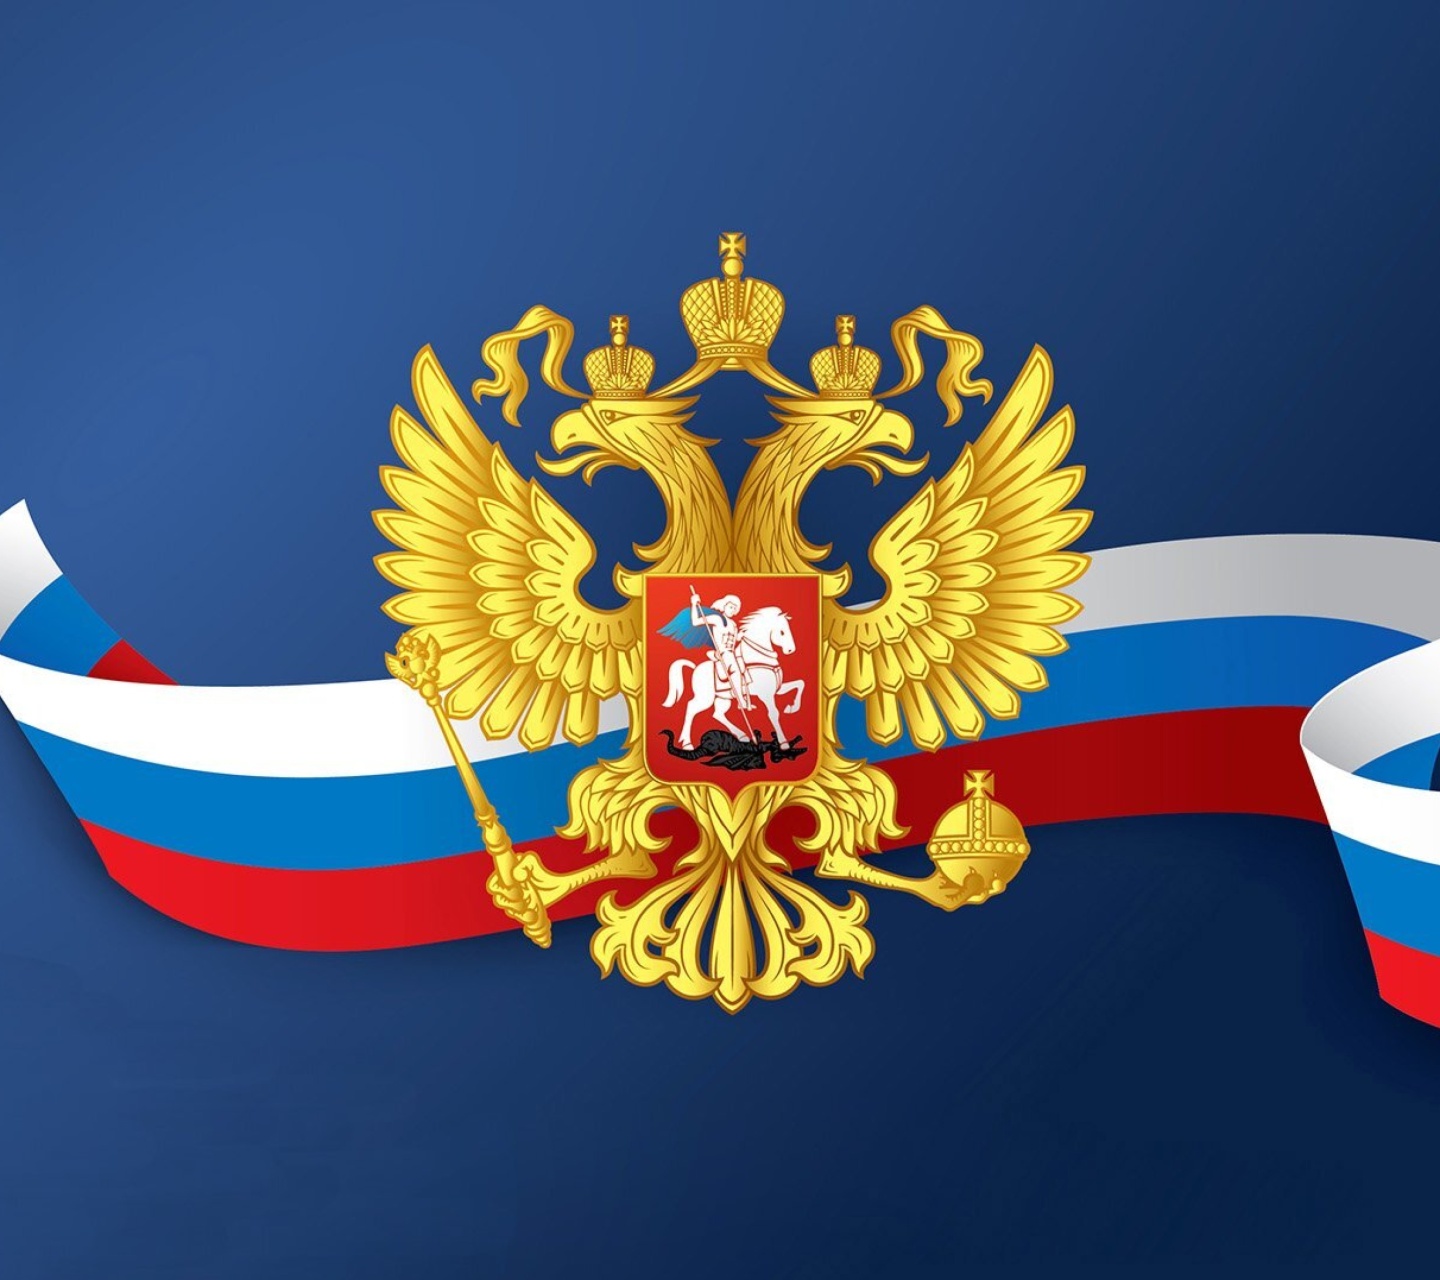 Russian coat of arms and flag screenshot #1 1440x1280